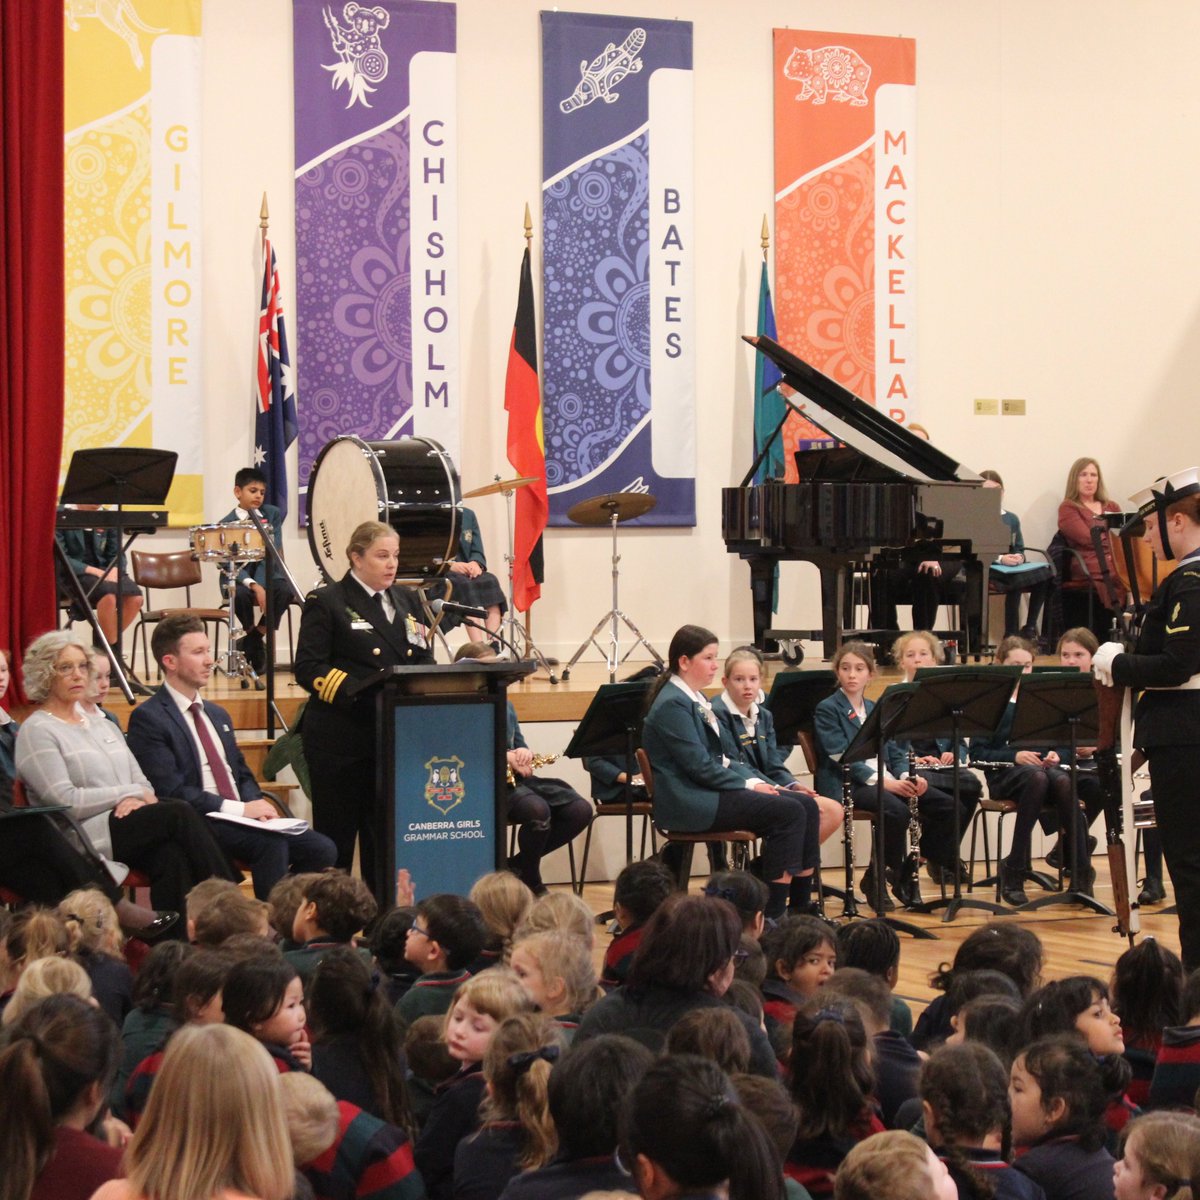 Yesterday and today, the CGGS community acknowledged the sacrifices of the ADF during a special Anzac Day Service Assemblies. Thank you to our special guest speakers and to the all-female Catafalque Party who left a significant, empowering mark on our students.

Lest we forget.